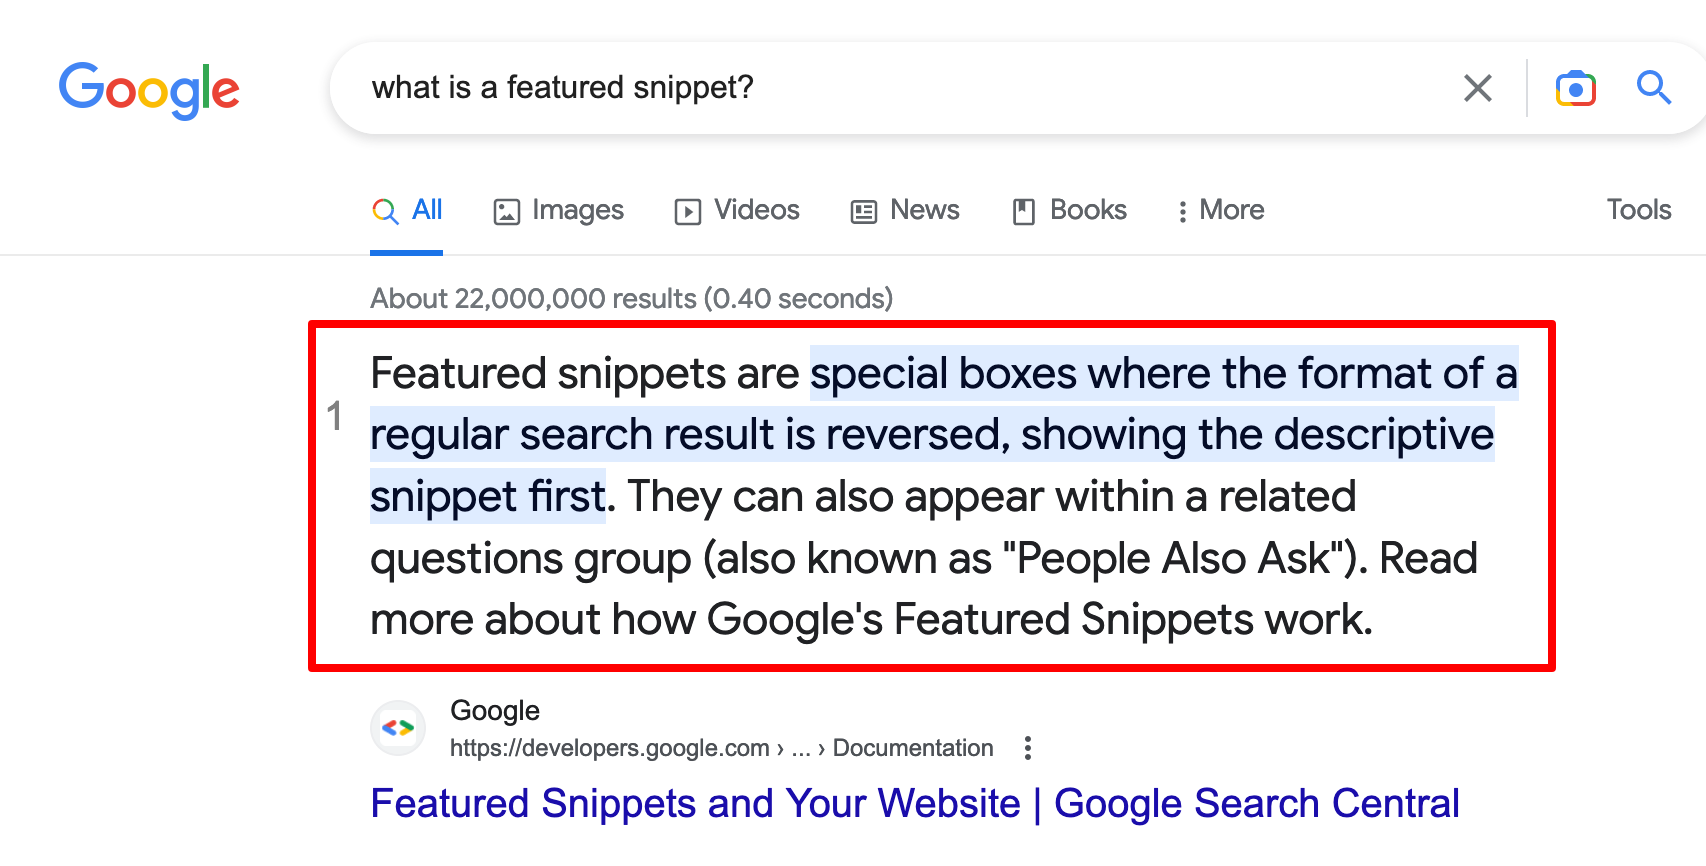 Display of a featured snippet on Google.